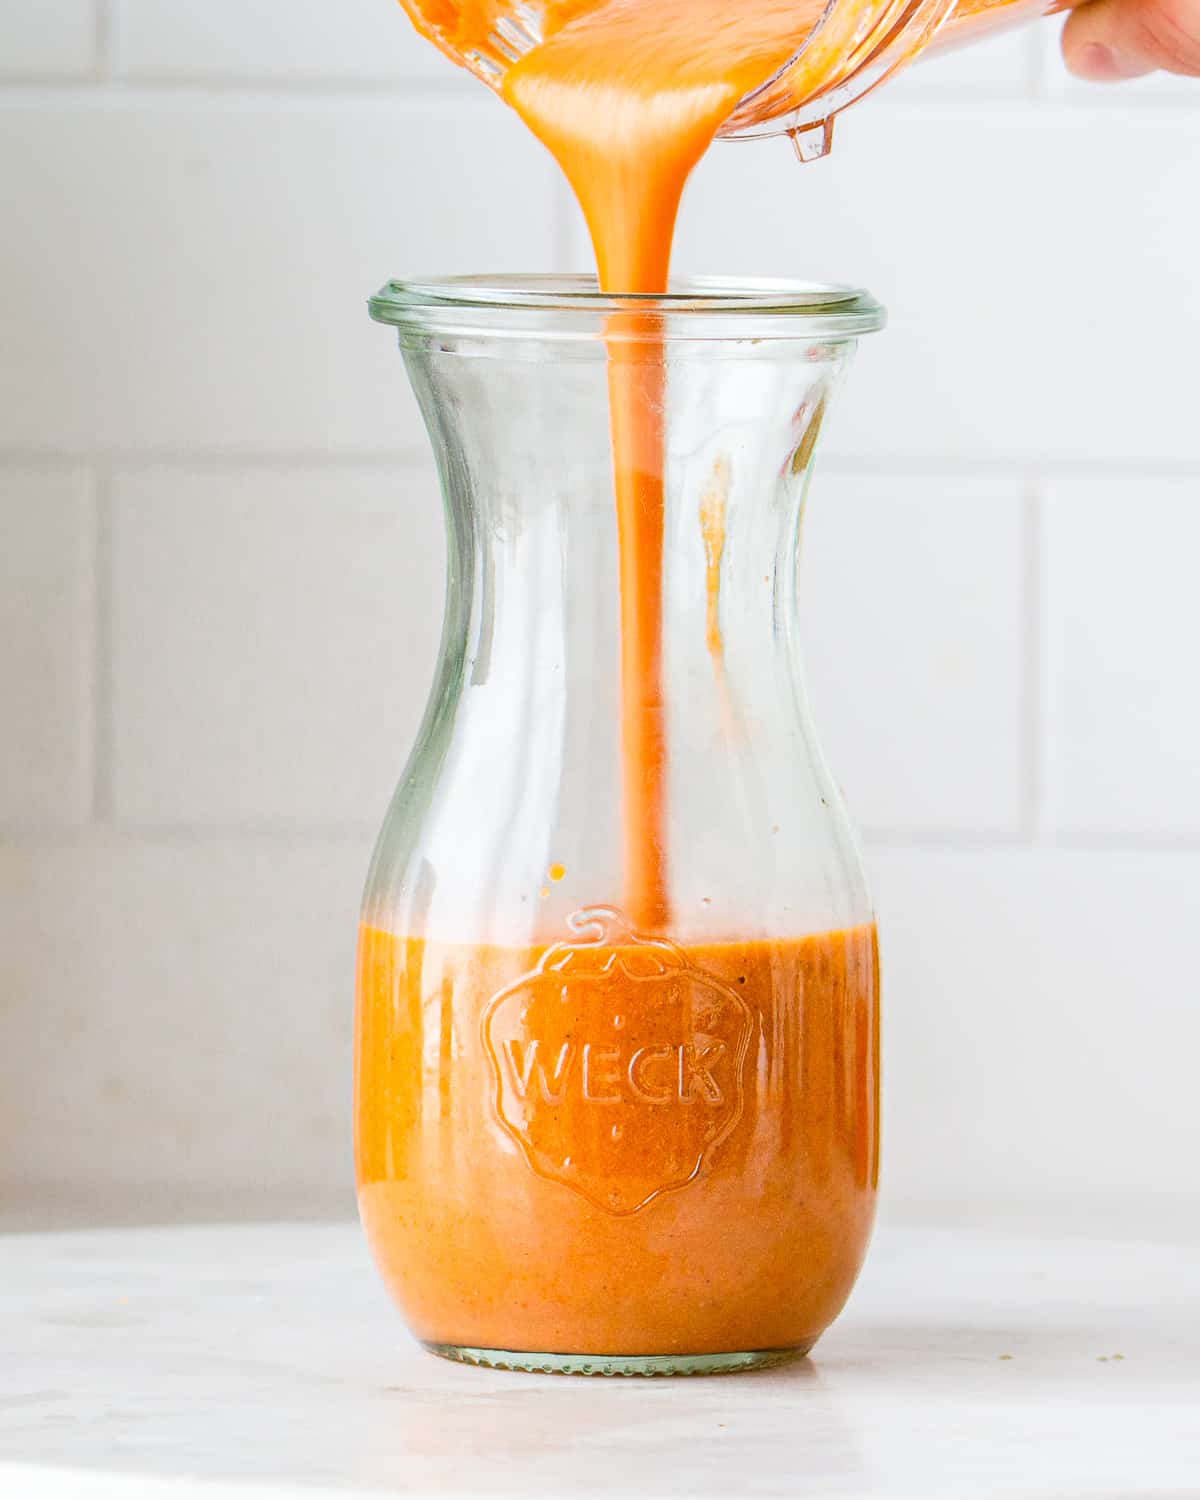 Hand pouring a creamy red-orange dressing into a small glass jar.